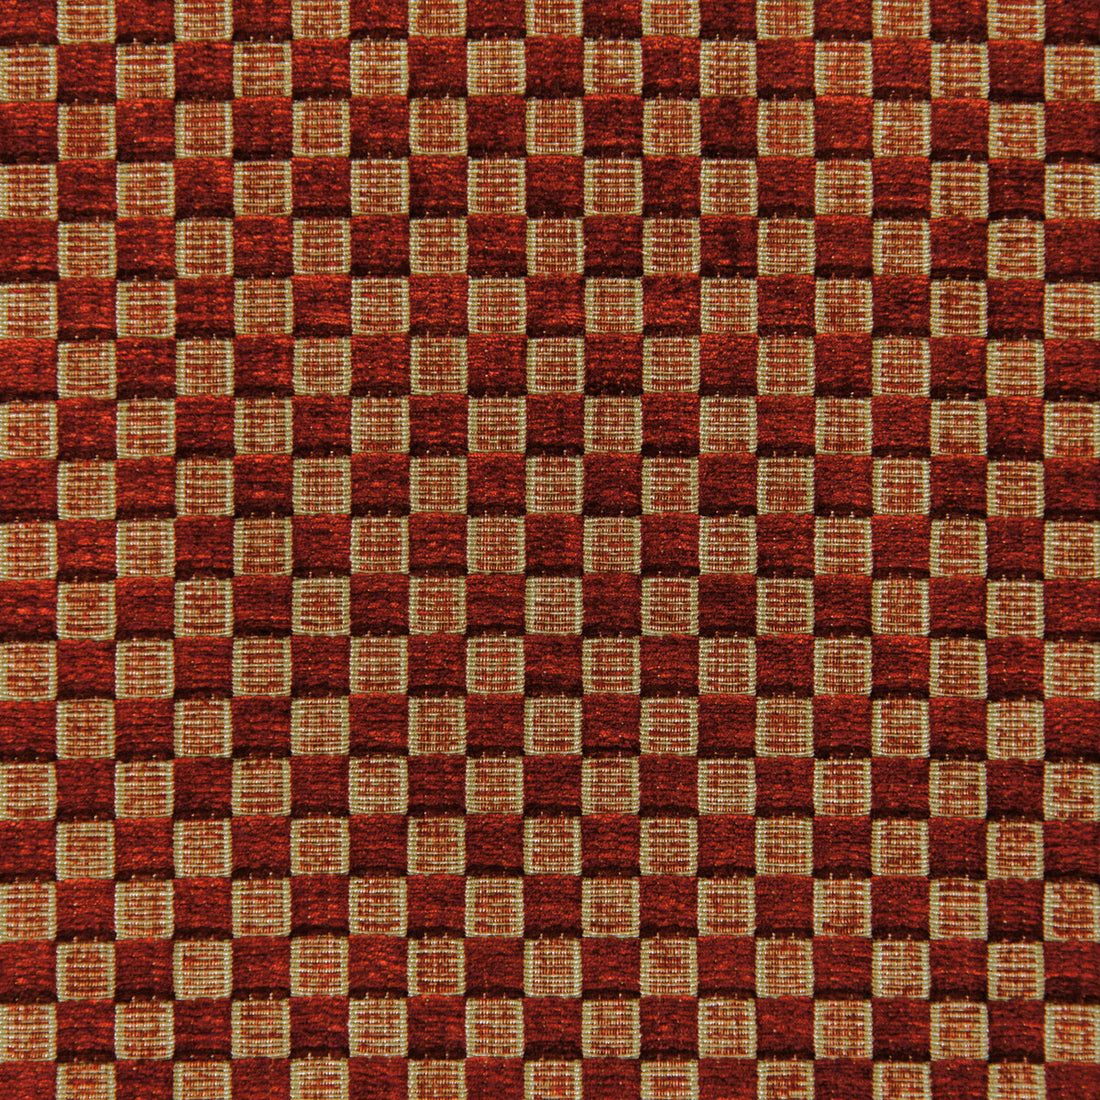 Allonby Weave fabric in ruby color - pattern 2020101.19.0 - by Lee Jofa in the Linford Weaves collection